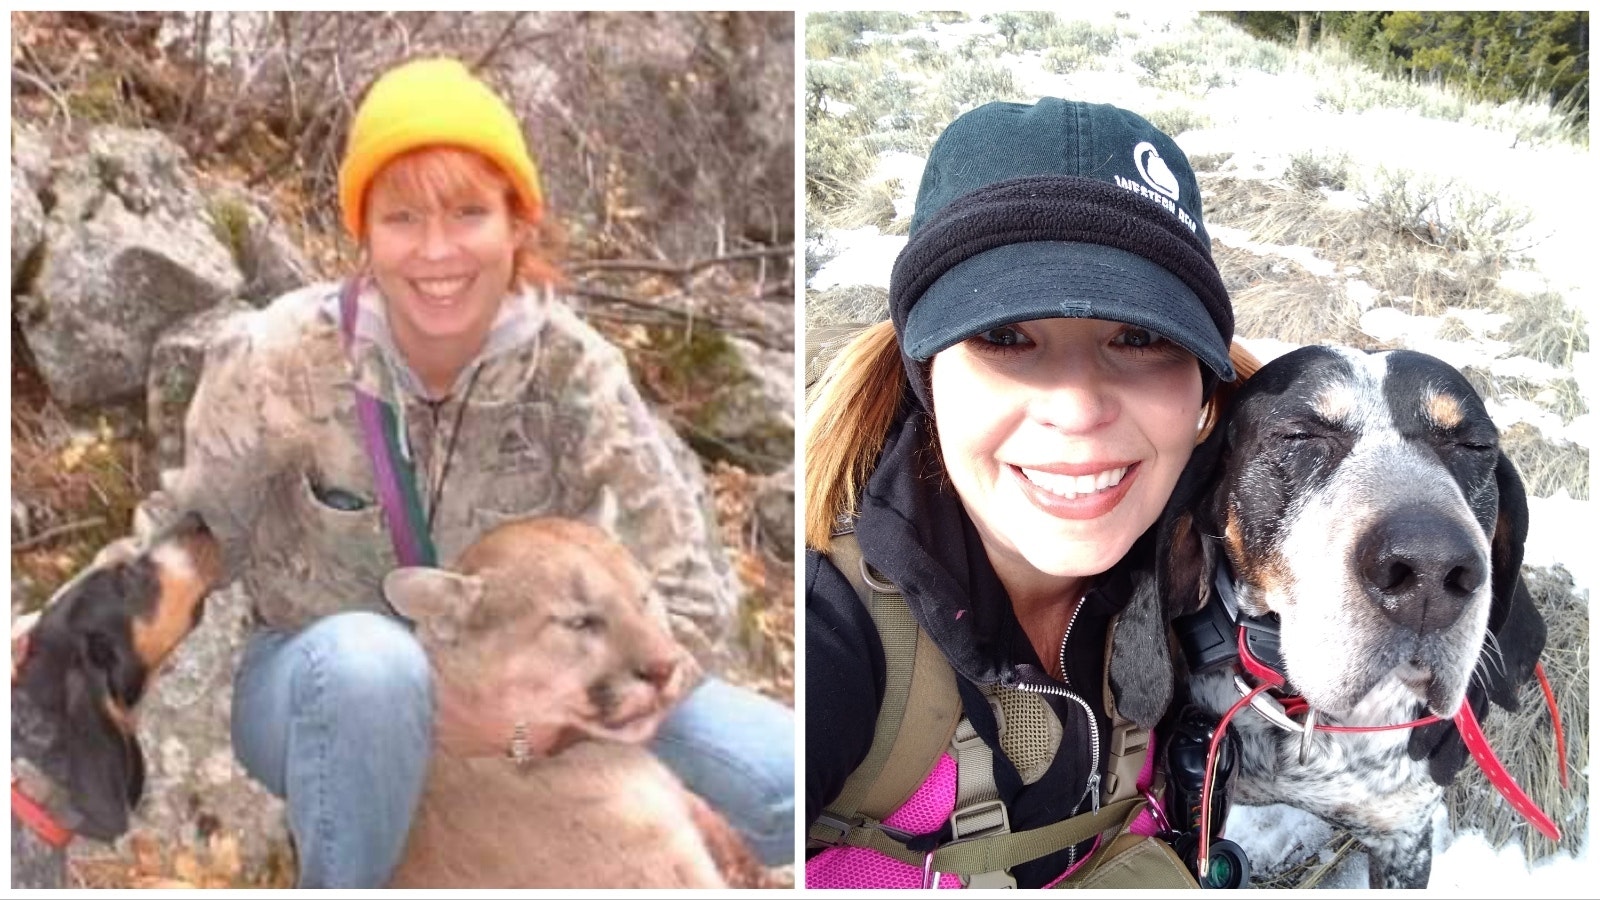 Tessa Fowler was one of the first women to guide mountain lion hunts in Wyoming. She bagged her own mountain lion in 2003, left. Her old blue tick hound dog Warden, right, has saved her more than once by chasing off grizzly bears in the Wyoming backcountry.